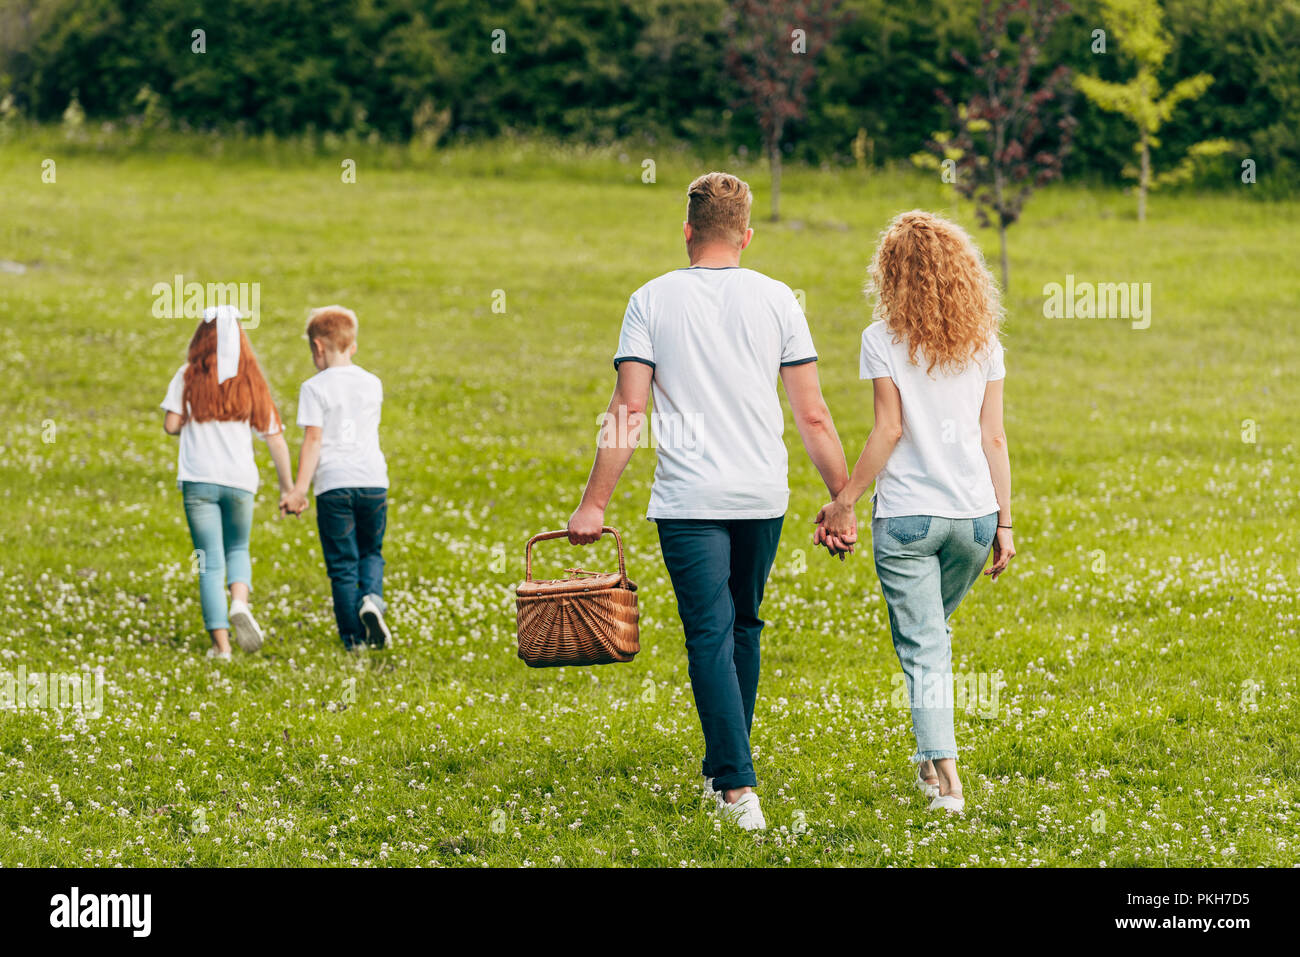 back view of family holding hands and walking with picnic basket in park Stock Photo